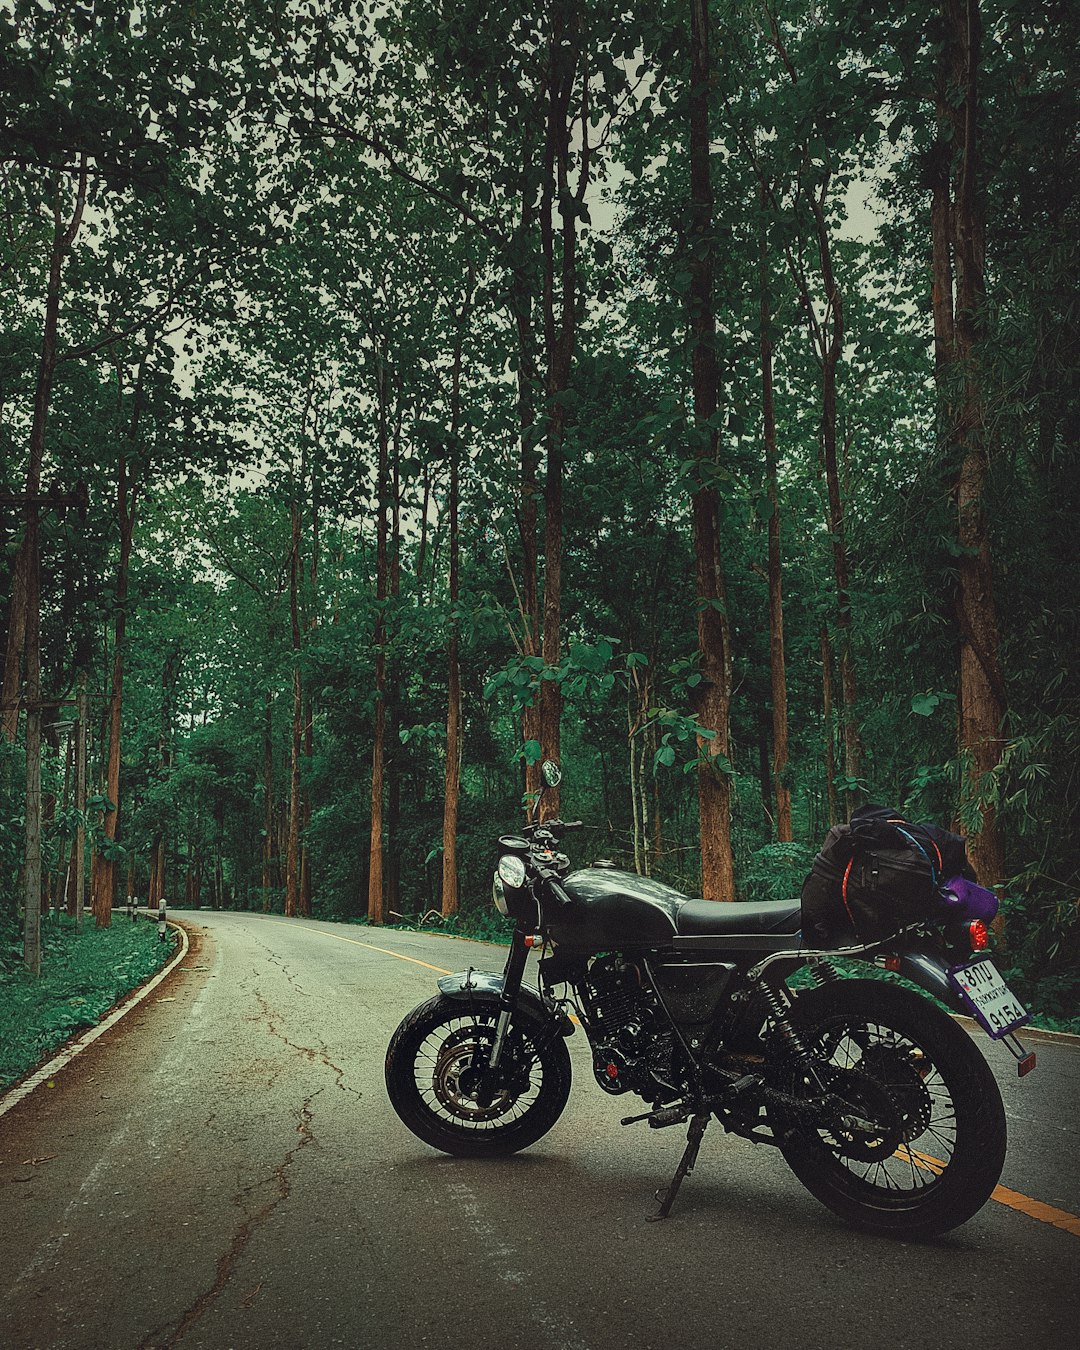 black motorcycle on road surrounded by trees during daytime